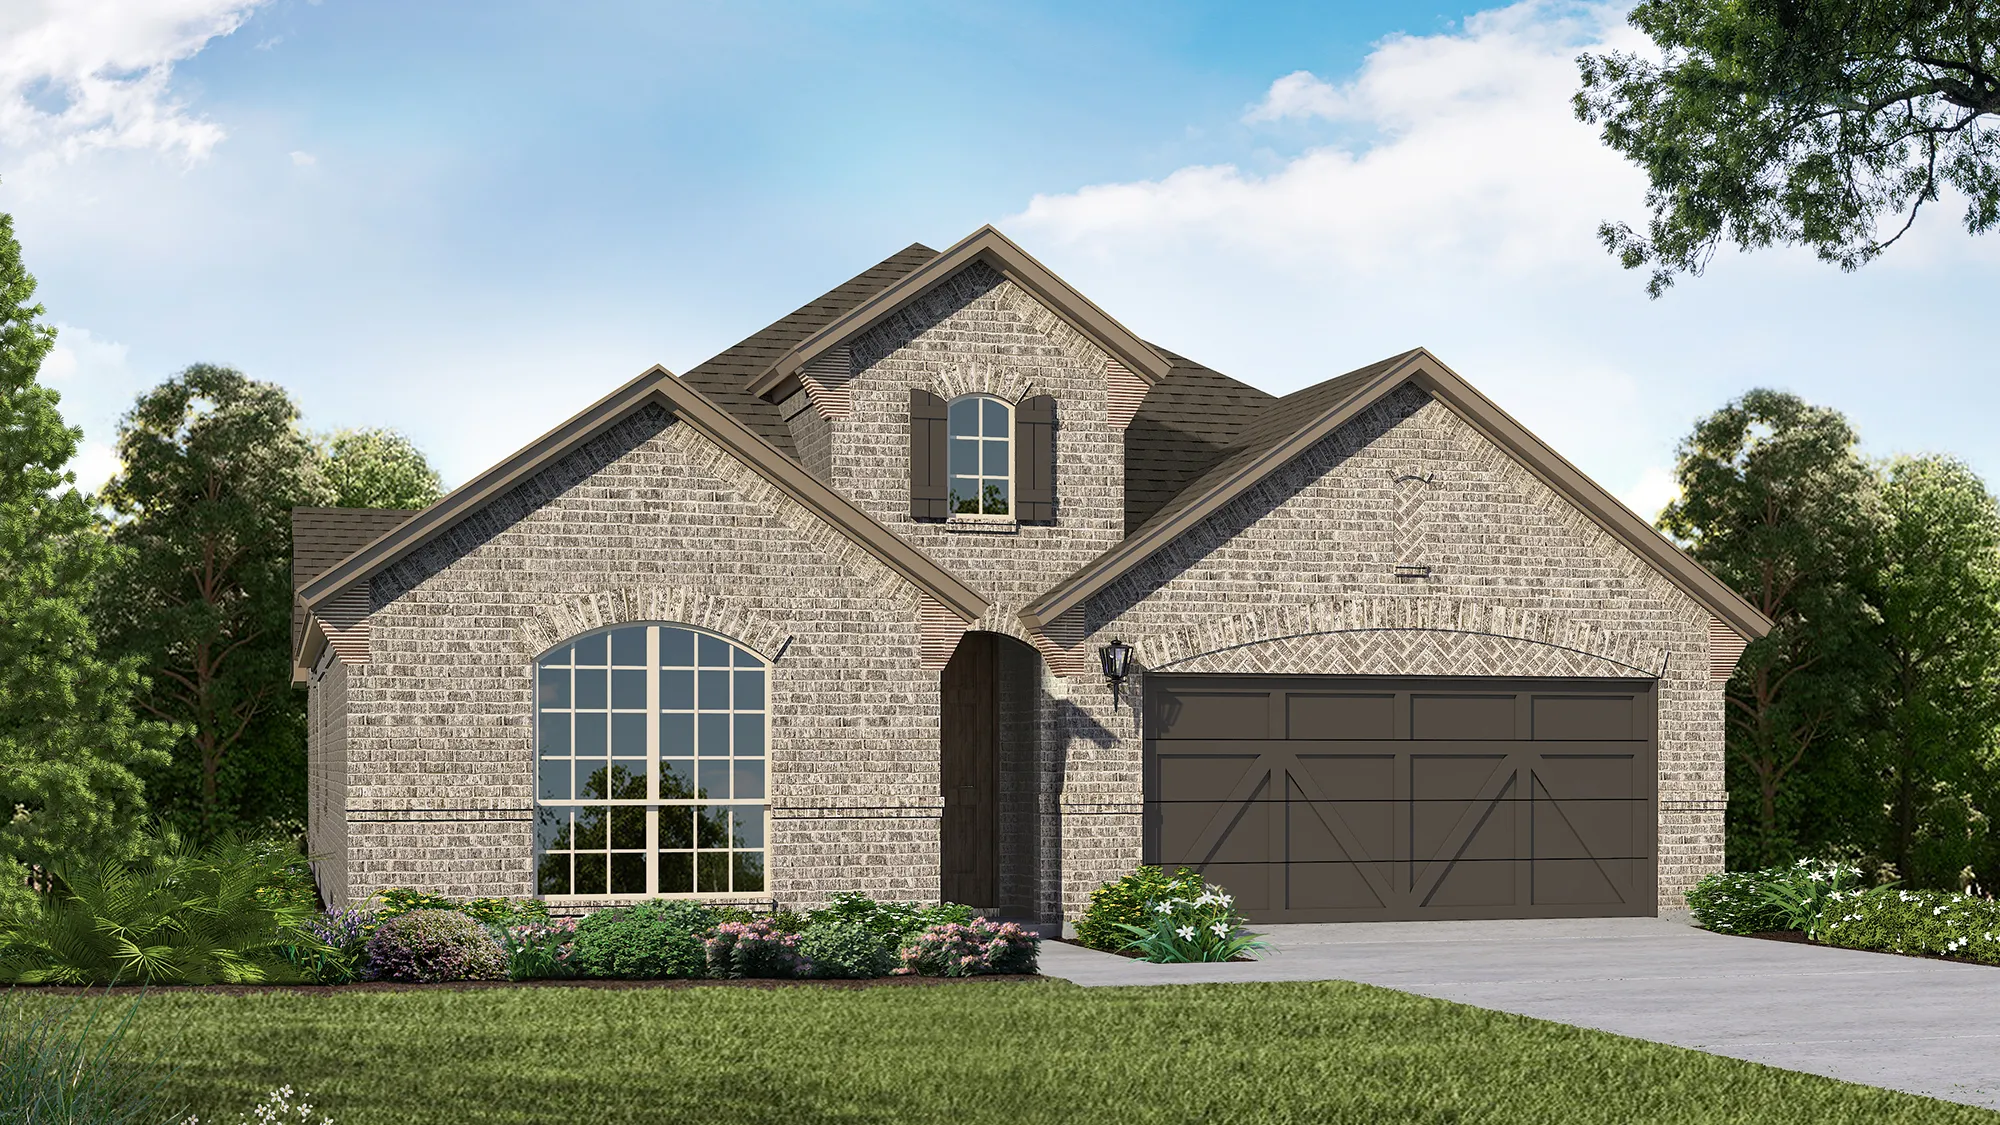 Plan 1523 Elevation A by American Legend Homes